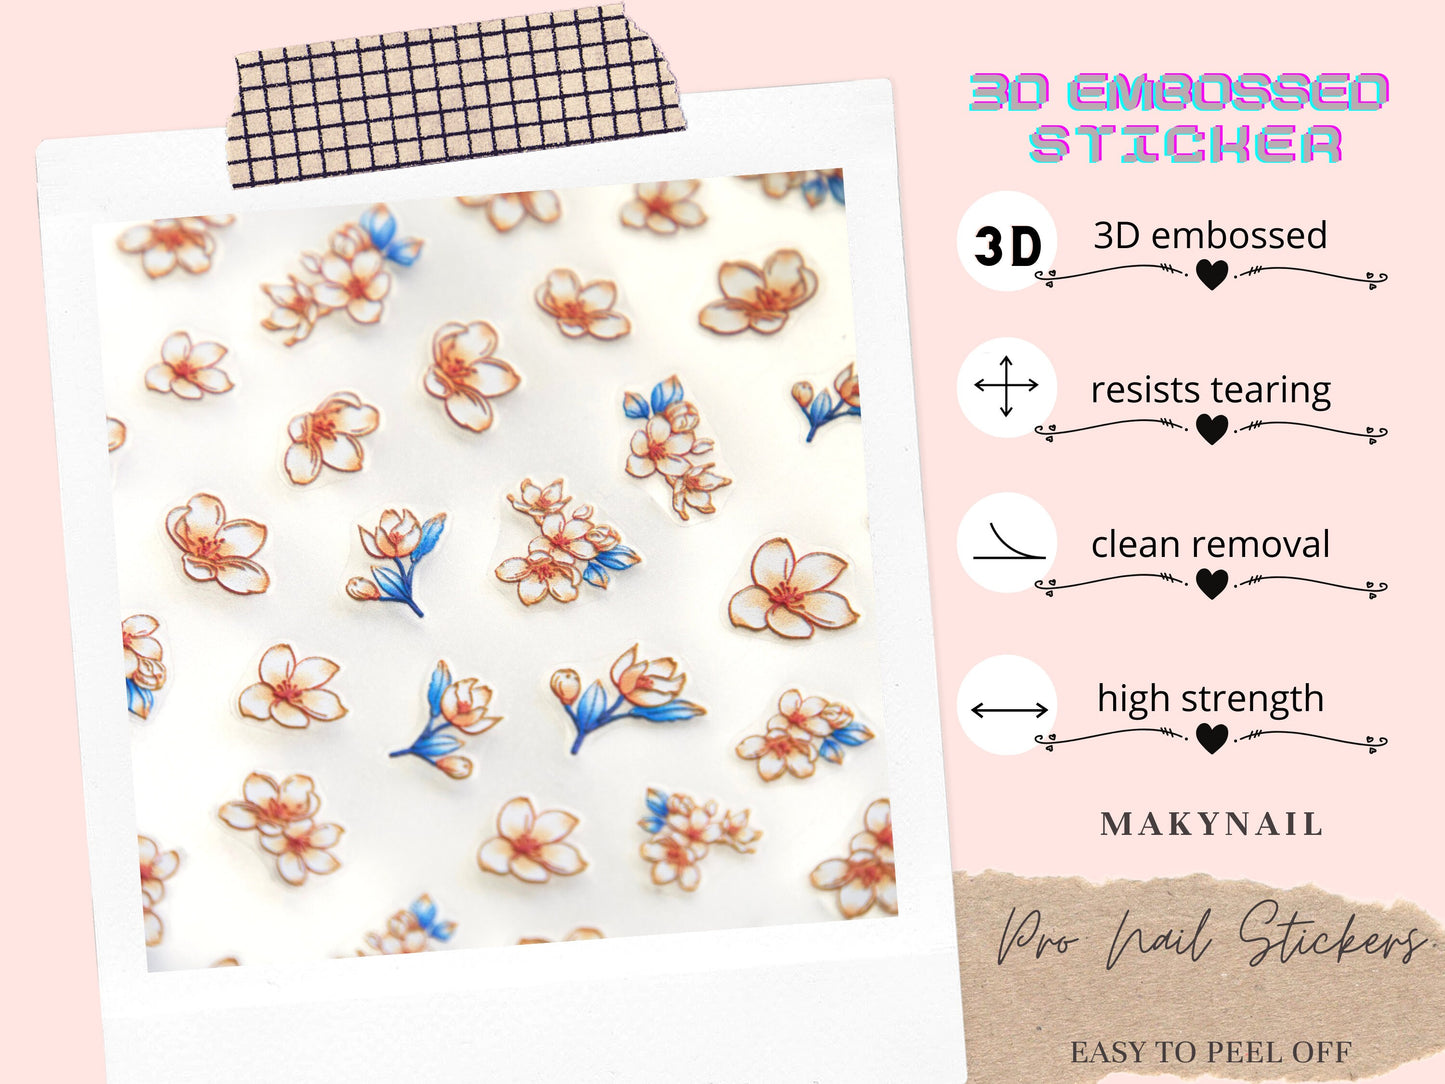 Sakura Floral Nail sticker/ Vintage style Embossed Flower 3D Nail Art Stickers Self Peel off Nail art /Sunflower Nail Art Decals